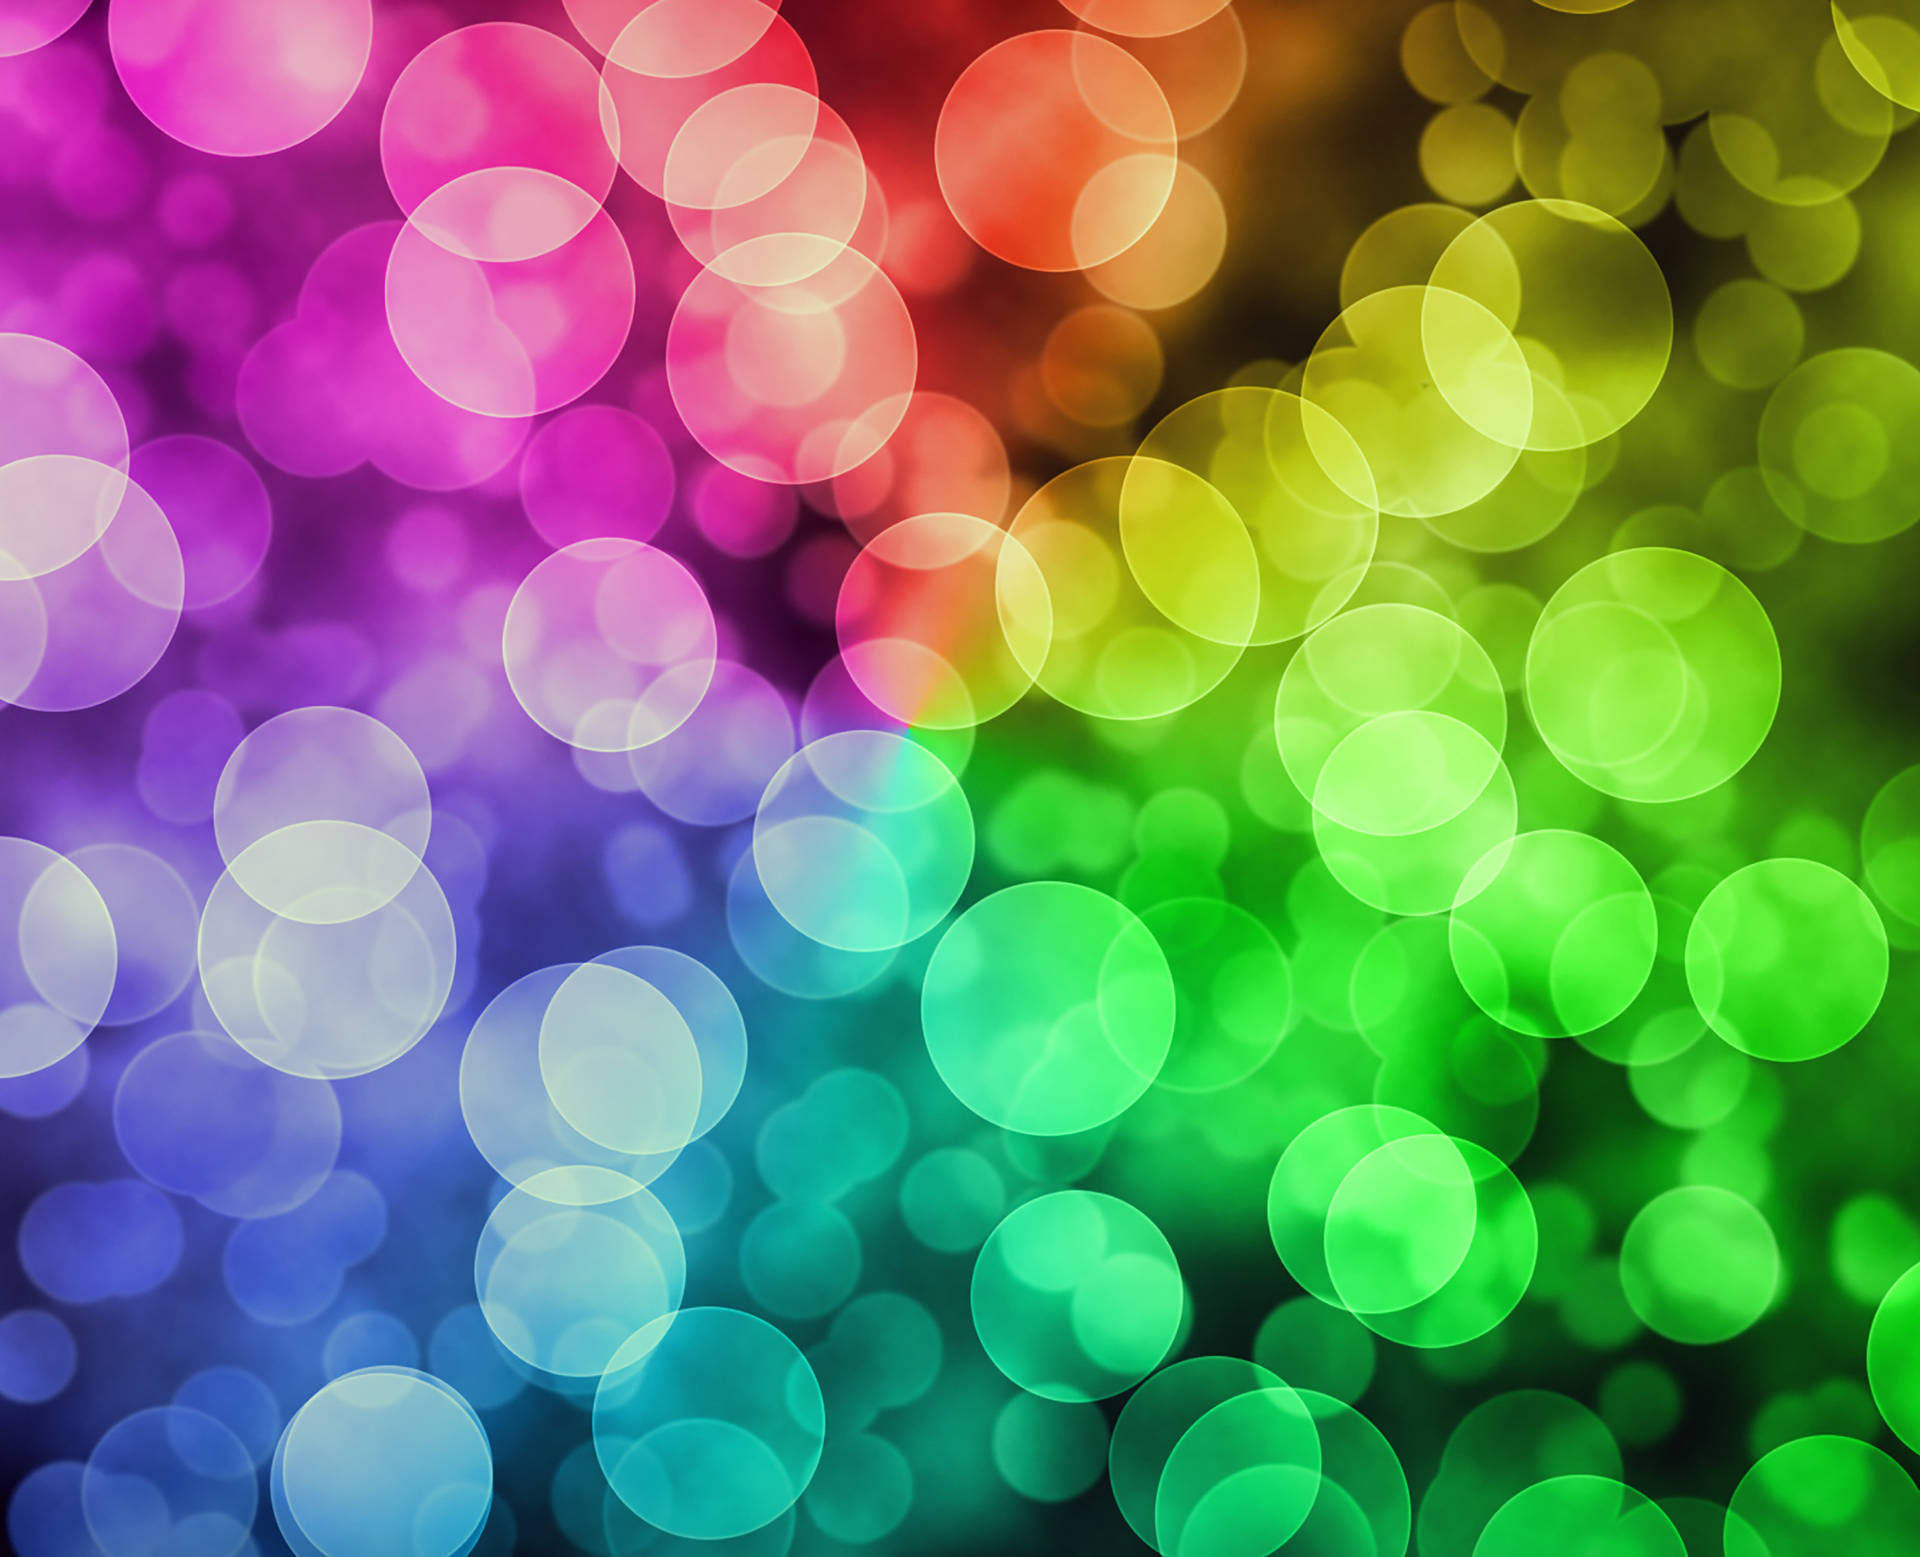 Abstract Multicolored Blurry Lights Wallpaper